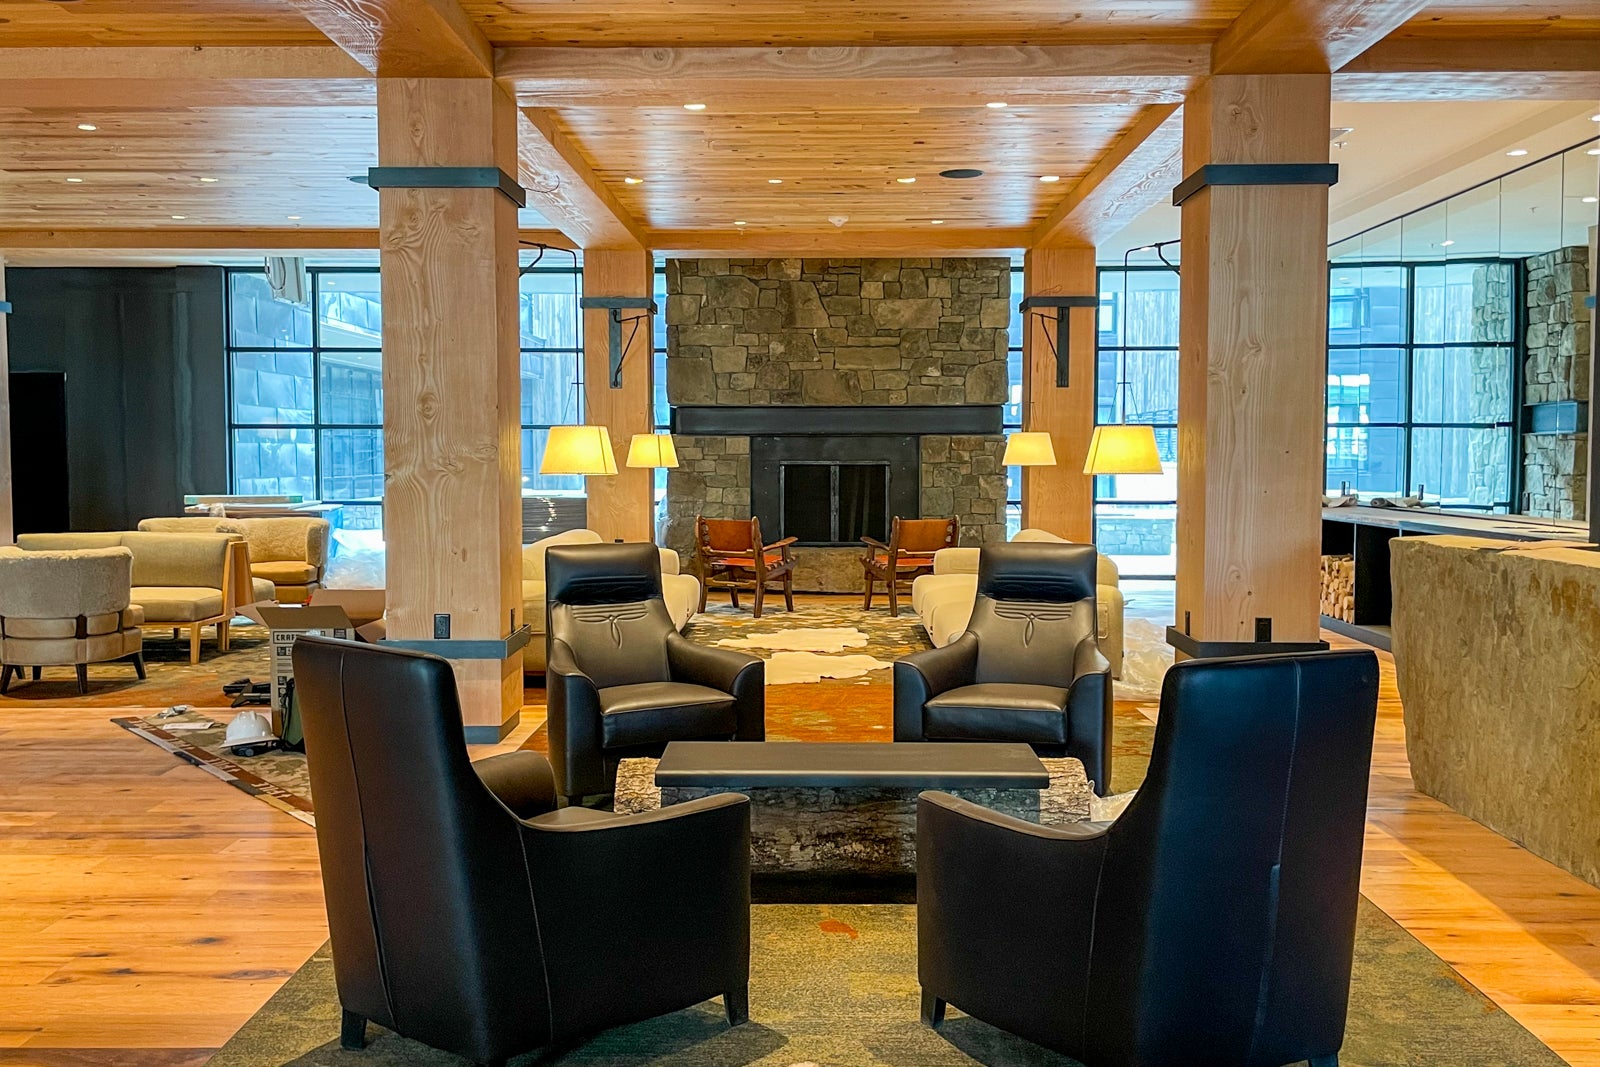 We got a sneak peek at a new luxury points hotel opening soon in Wyoming - The Points Guy